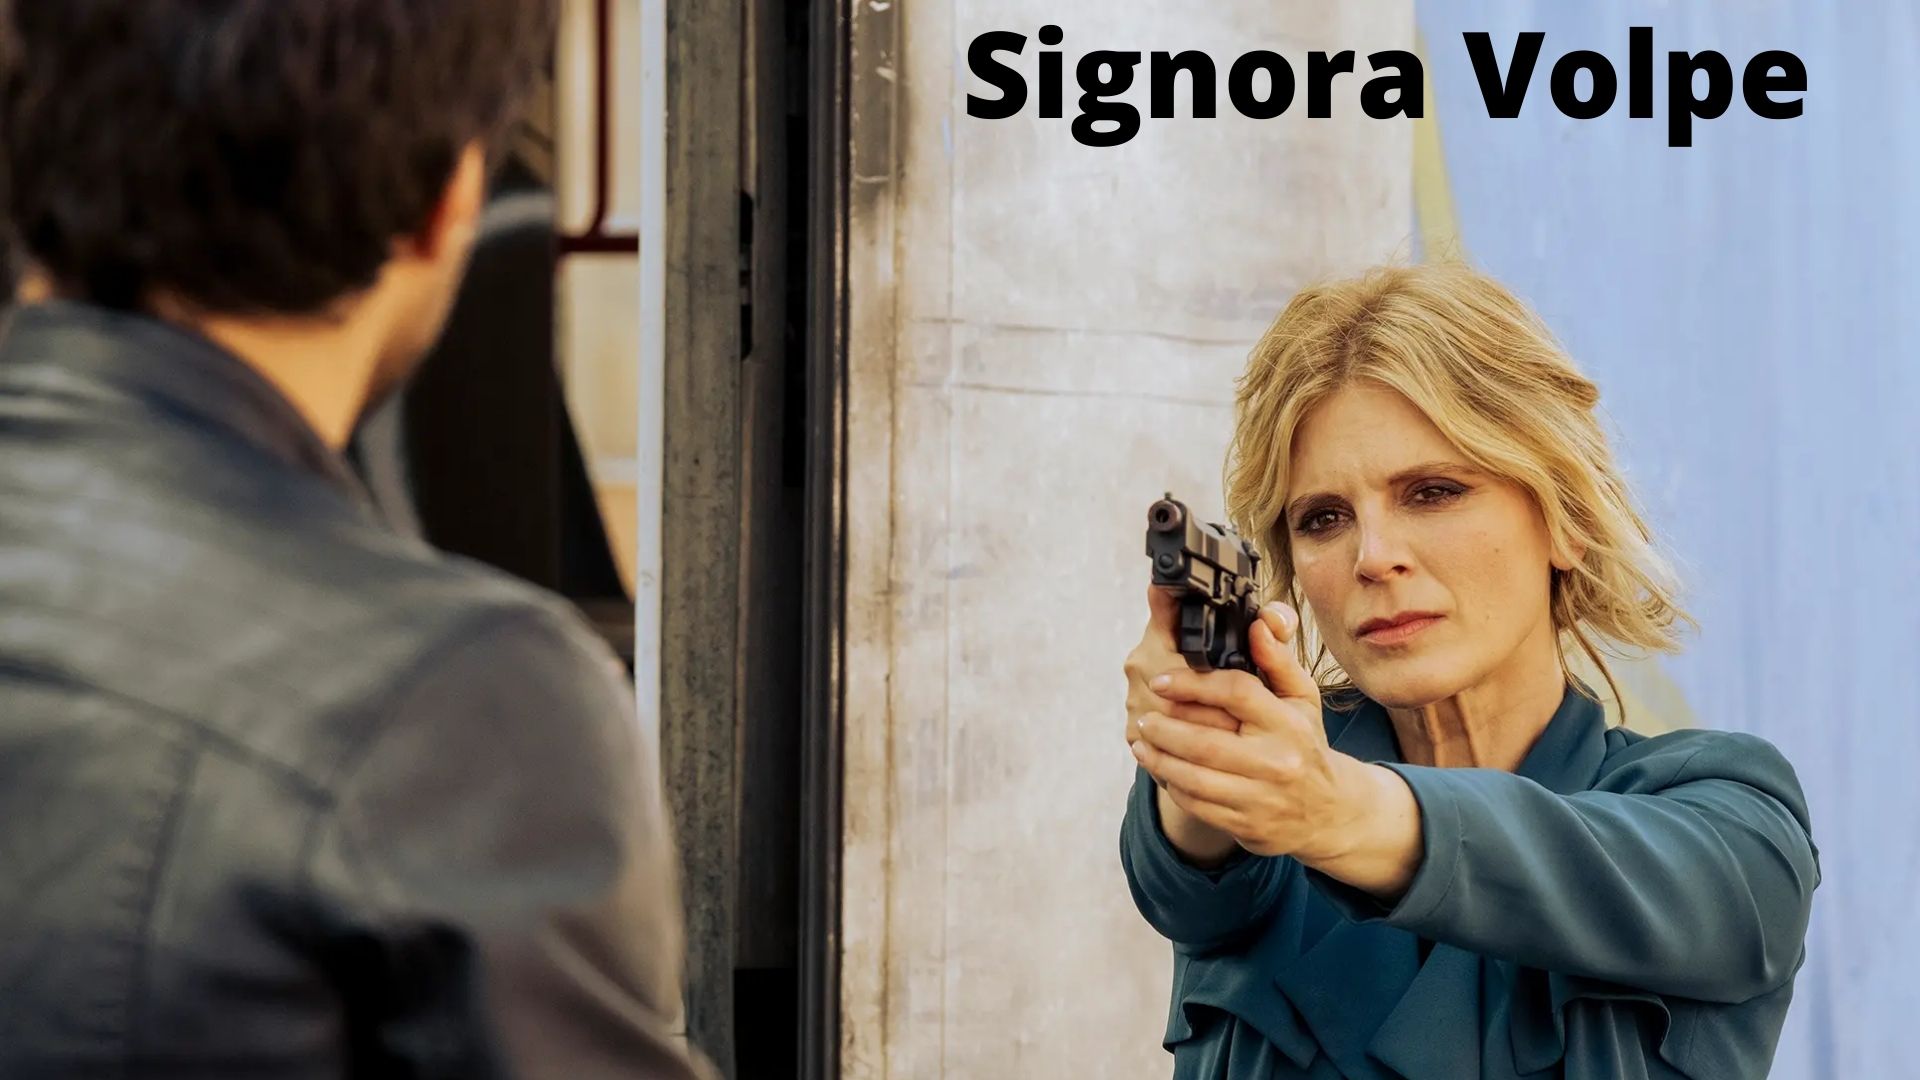 Signora Volpe Parents Guide and Age Rating | 2022